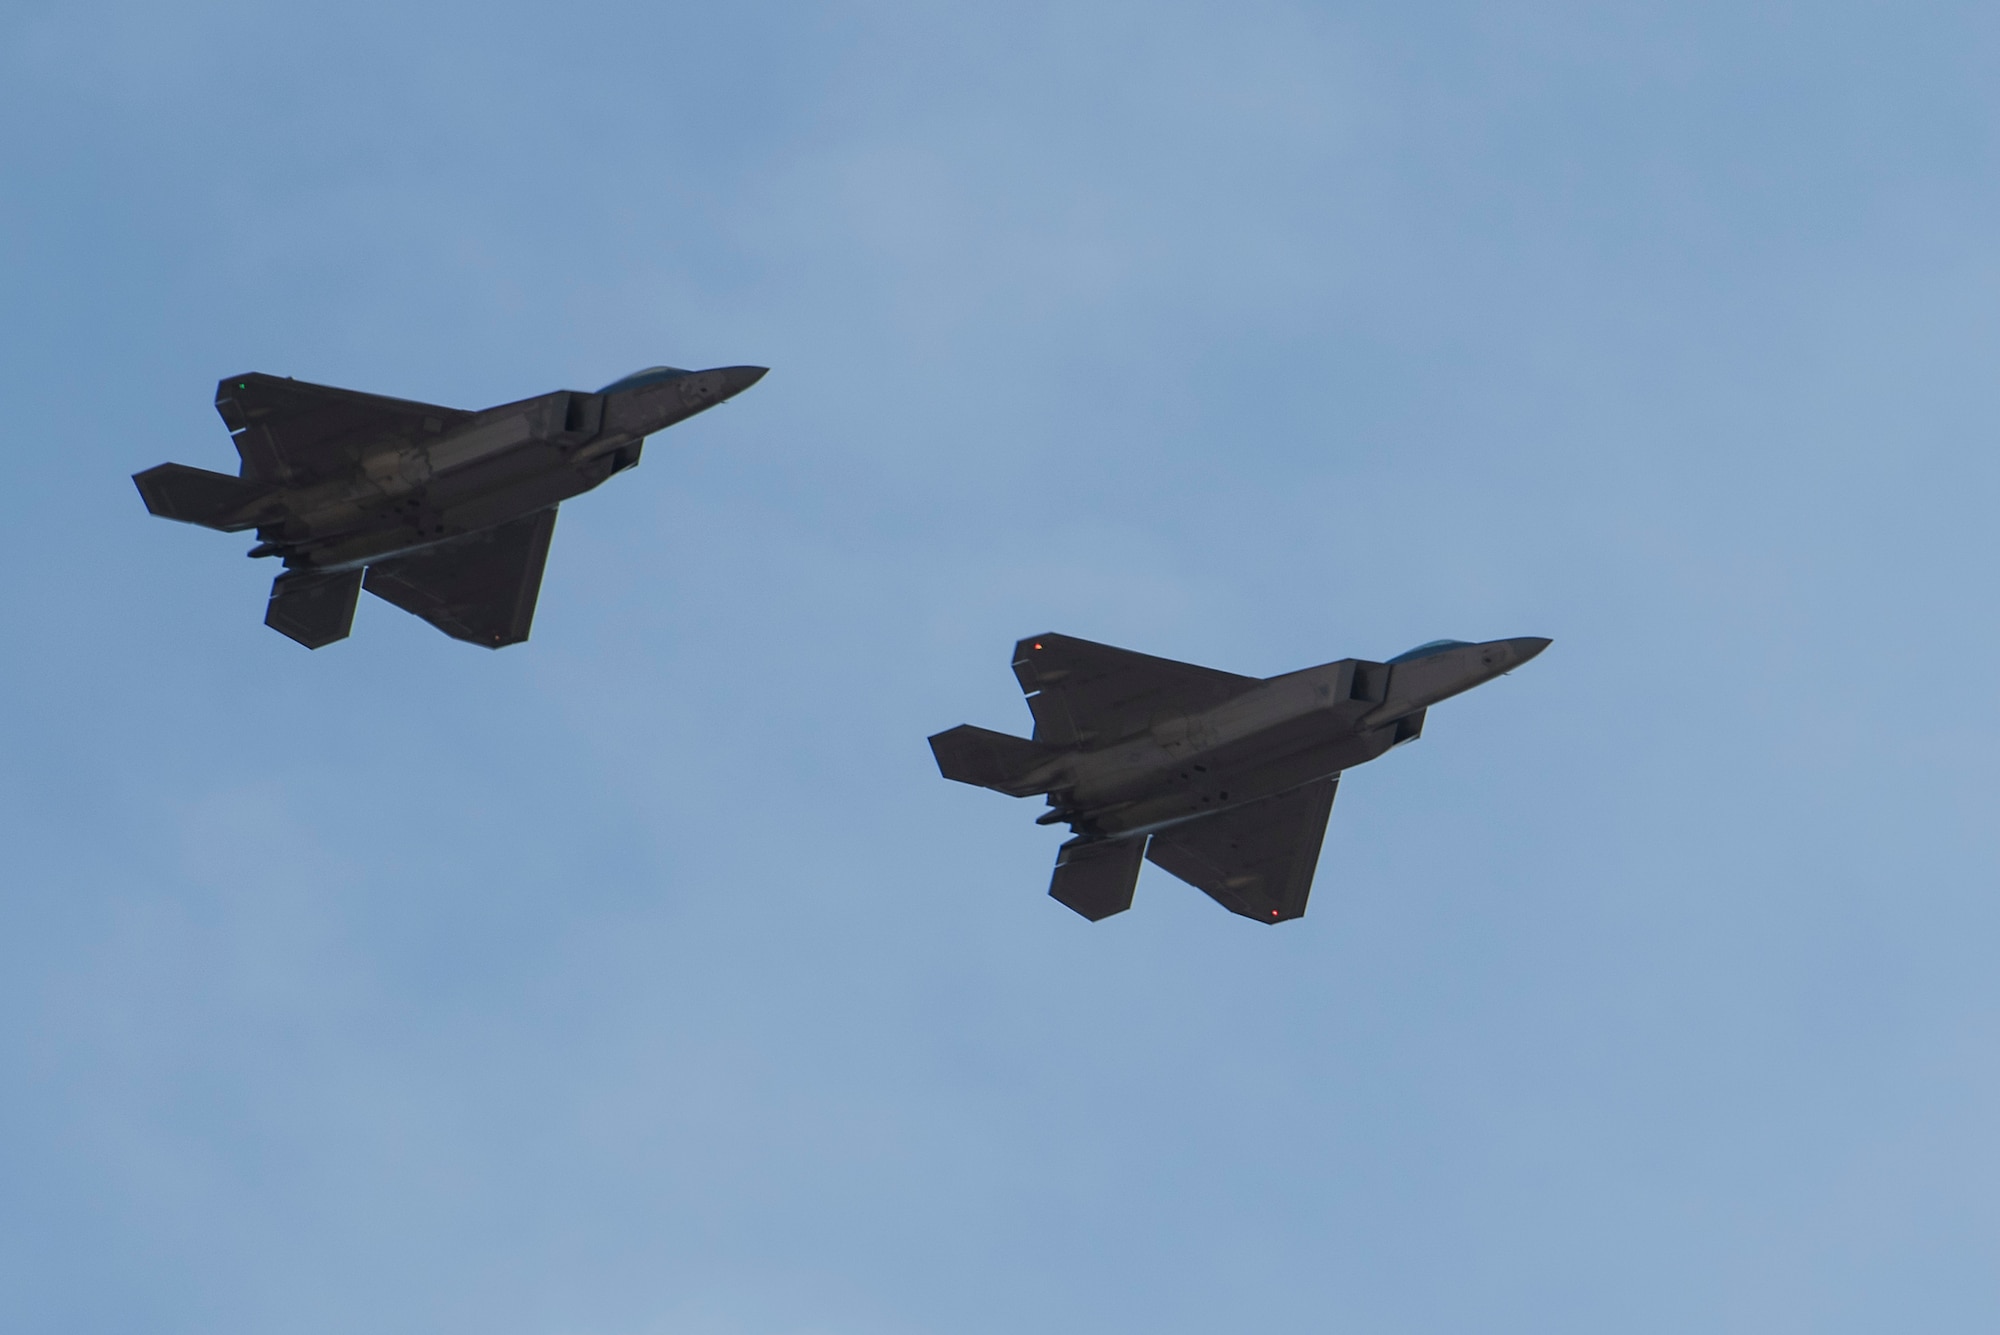 U.S. Air Force F-22 Raptors fly in formation during in-house exercise Patriot Grizzly and joint exercise Winter Fury at Marine Corps Air Station Miramar, San Diego, Calif., Jan. 16, 2019. Both exercises enabled Joint Base Elmendorf-Richardson, Alaska, aircrew and pilots to practice standardized tactics through consistent flying. Winter Fury involved both Marine F/A-18C Hornets, and Navy F-35C Lightning II’s, partnering with F-22s to perform air-to-air combat.